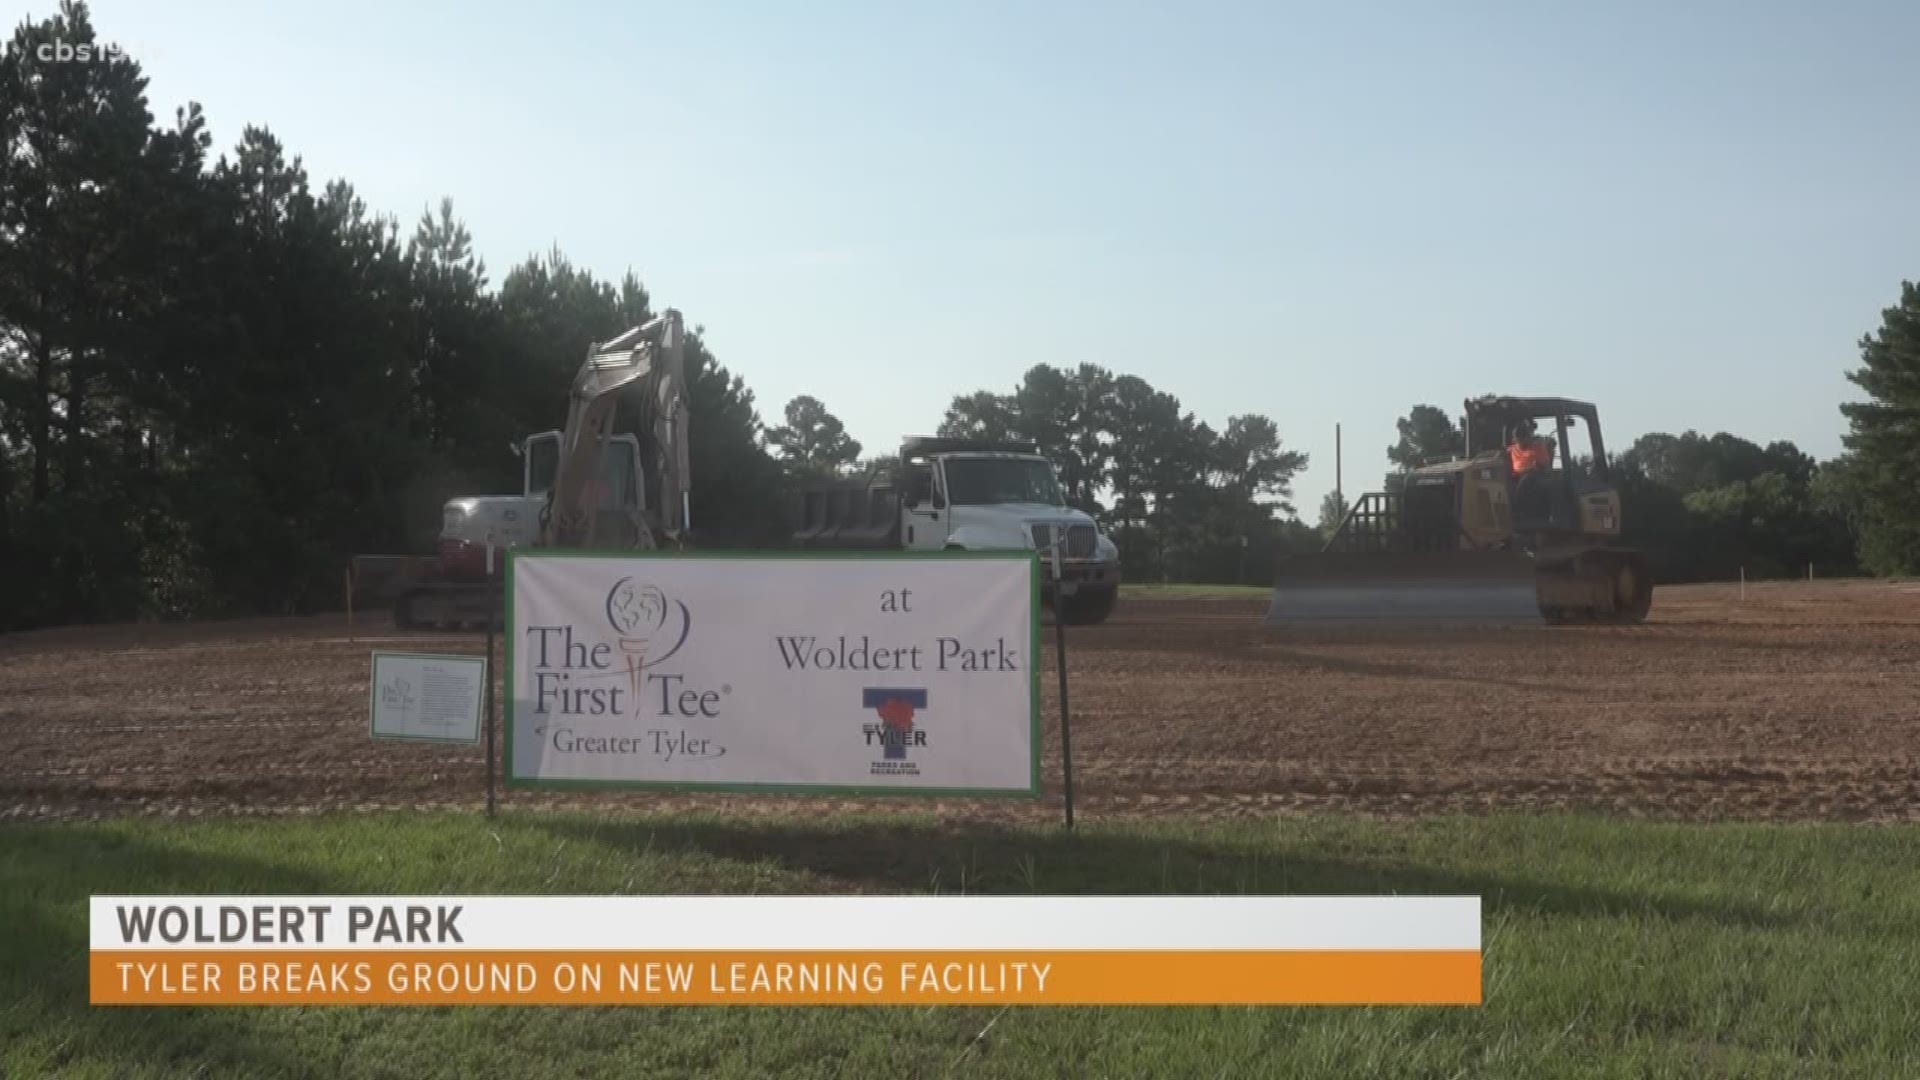 The facility will include a limited flight driving range, putting green and chipping green.